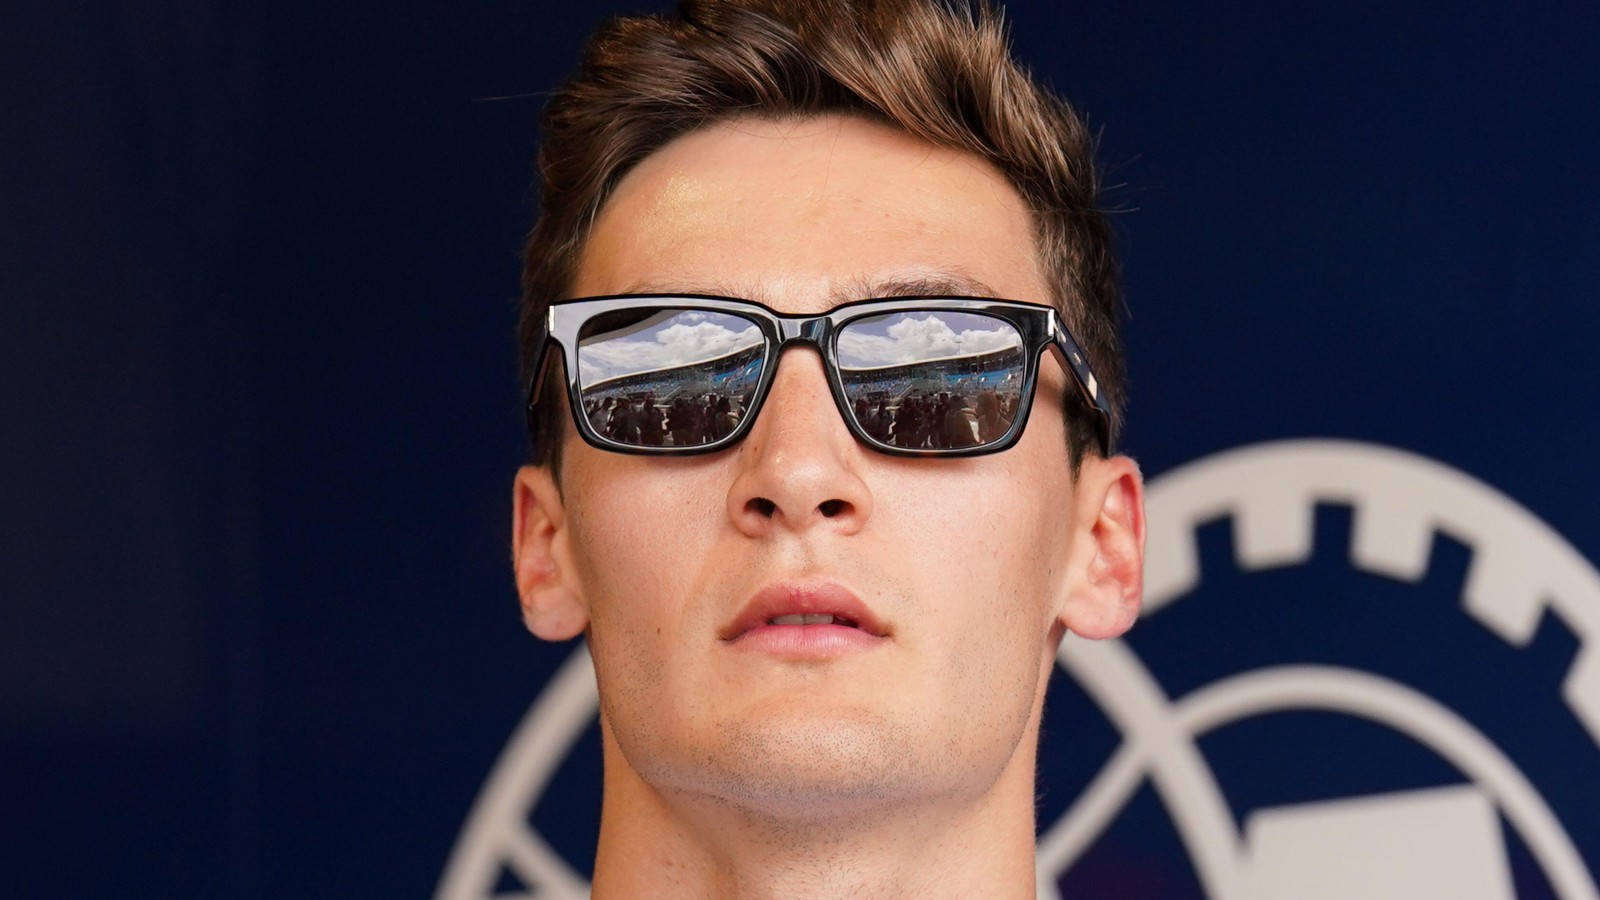 George Russell, Mercedes, wearing sunglasses. United States, May 2022.